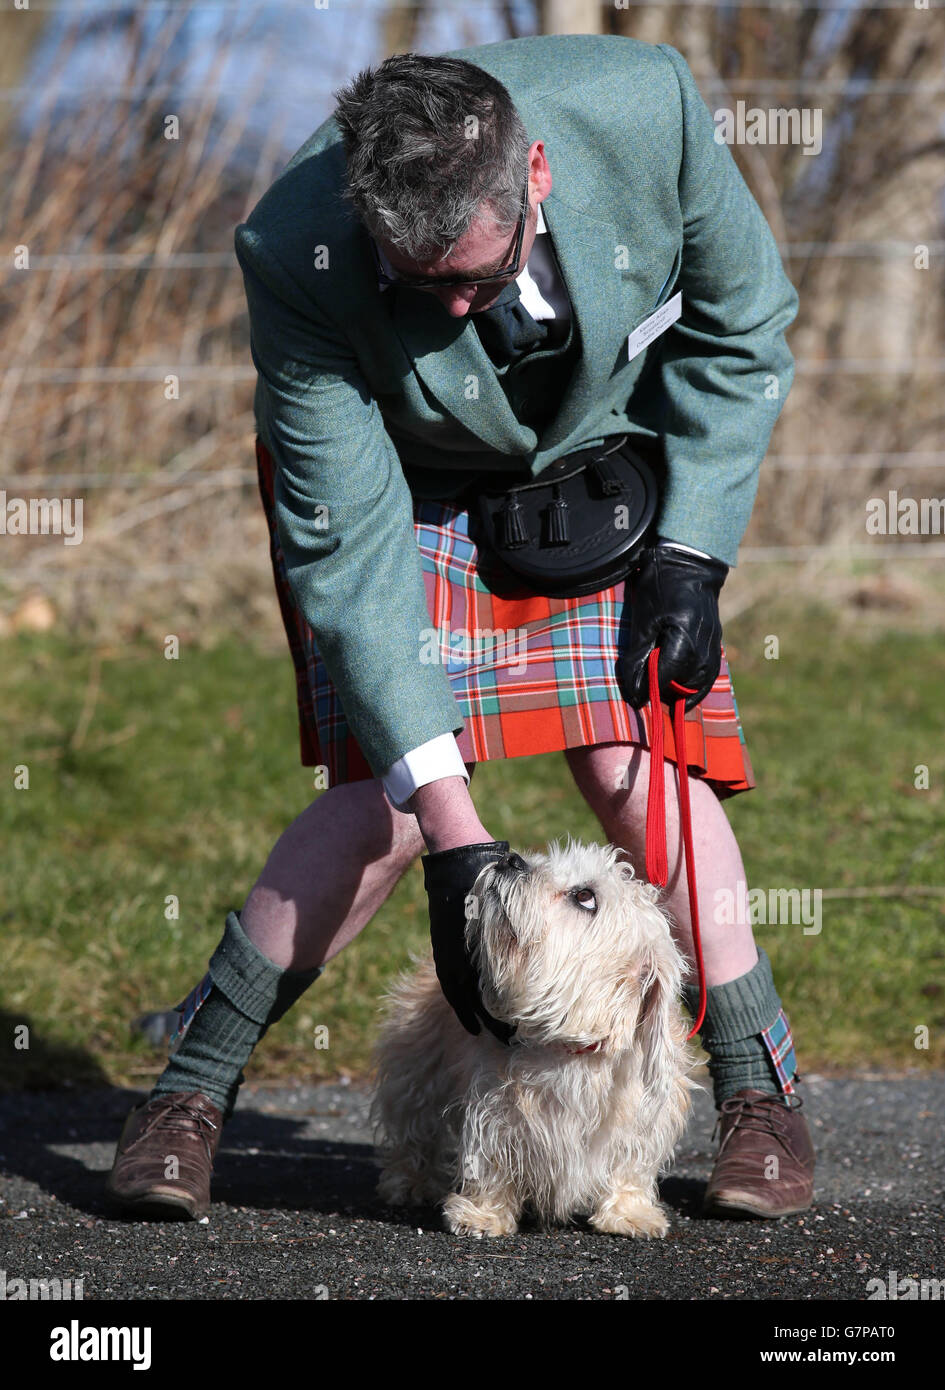 Kenny Allan, from Eyemouth, with Buzet the Dandie Dinmont Terrier, as they visit Sir Walter Scott's home at Abbotsford, Melrose, in the Scottish Borders, on the 200th anniversary of the publication of the book Guy Mannering which gave the breed its distinctive name. Stock Photo